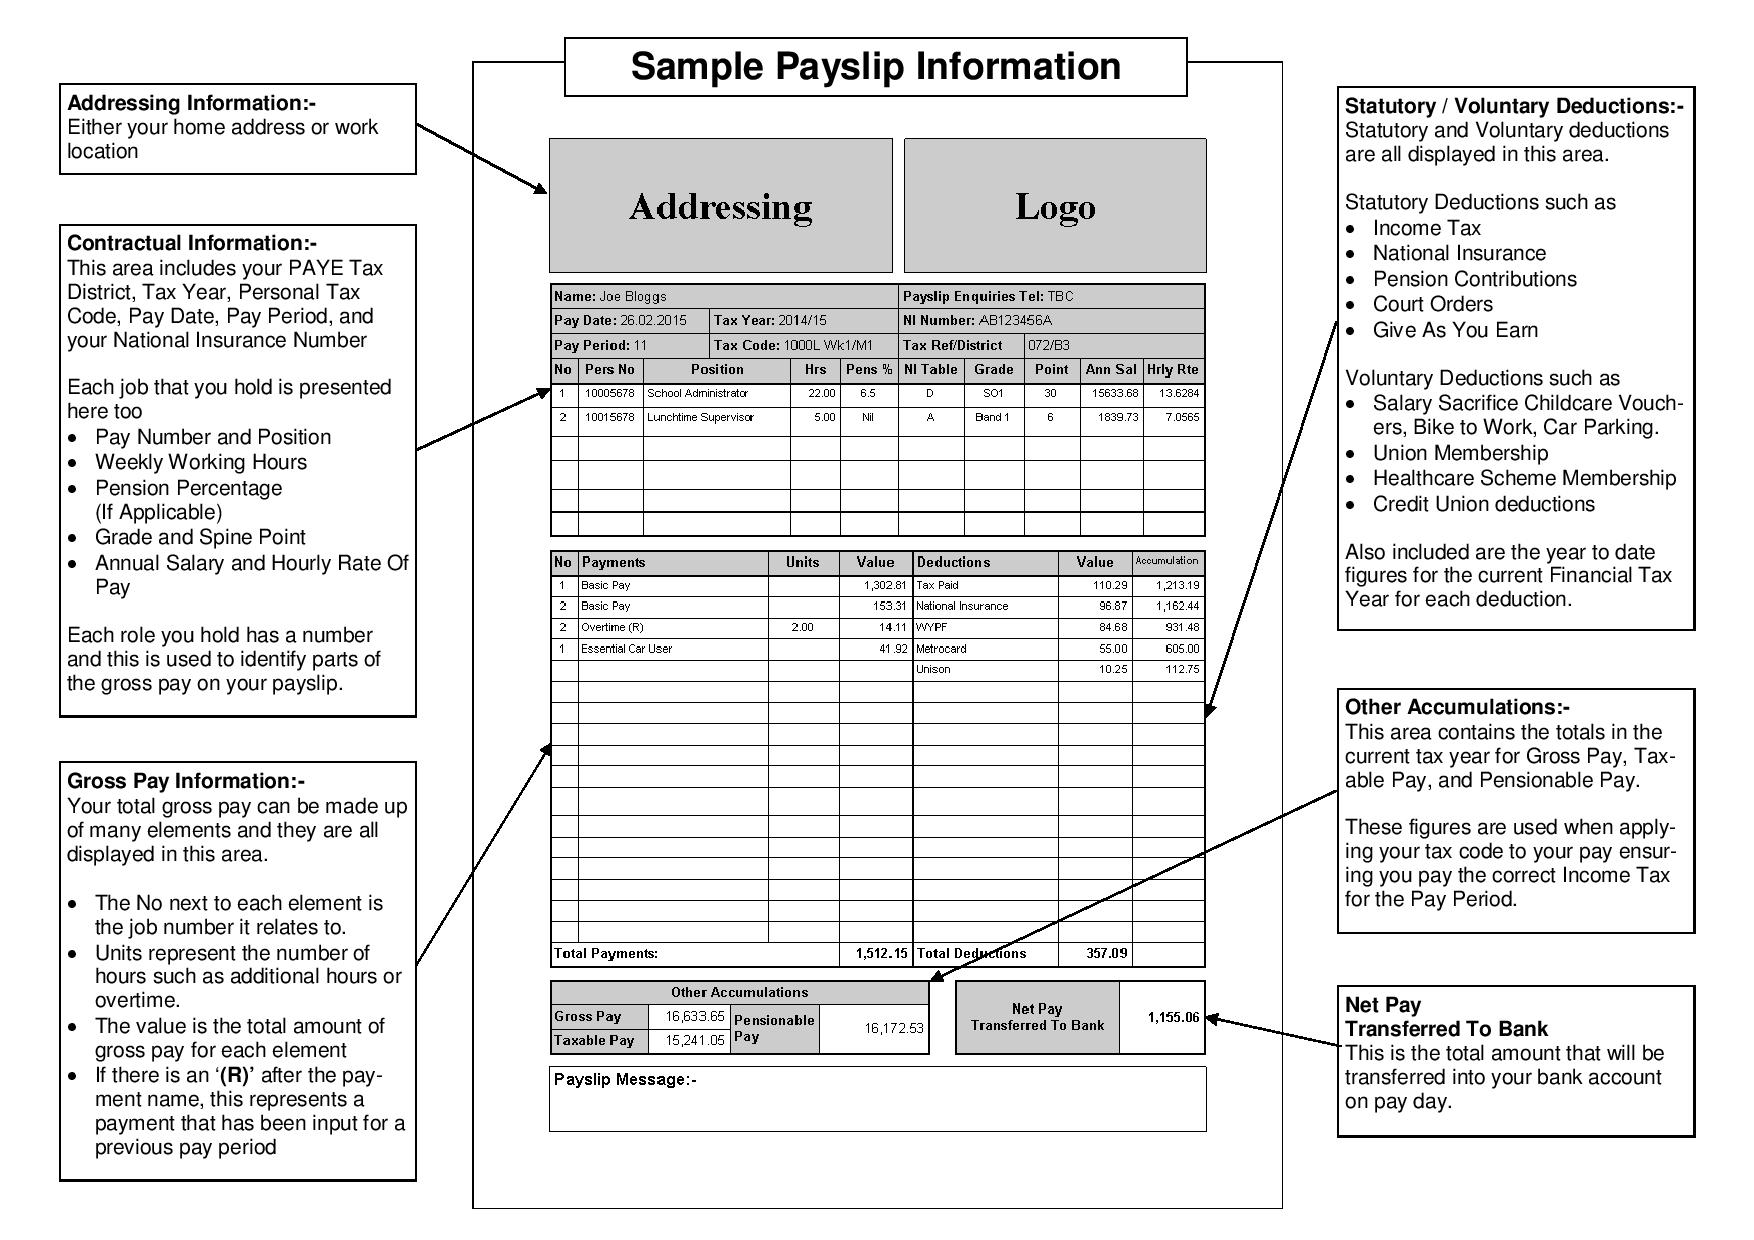 payslip information example